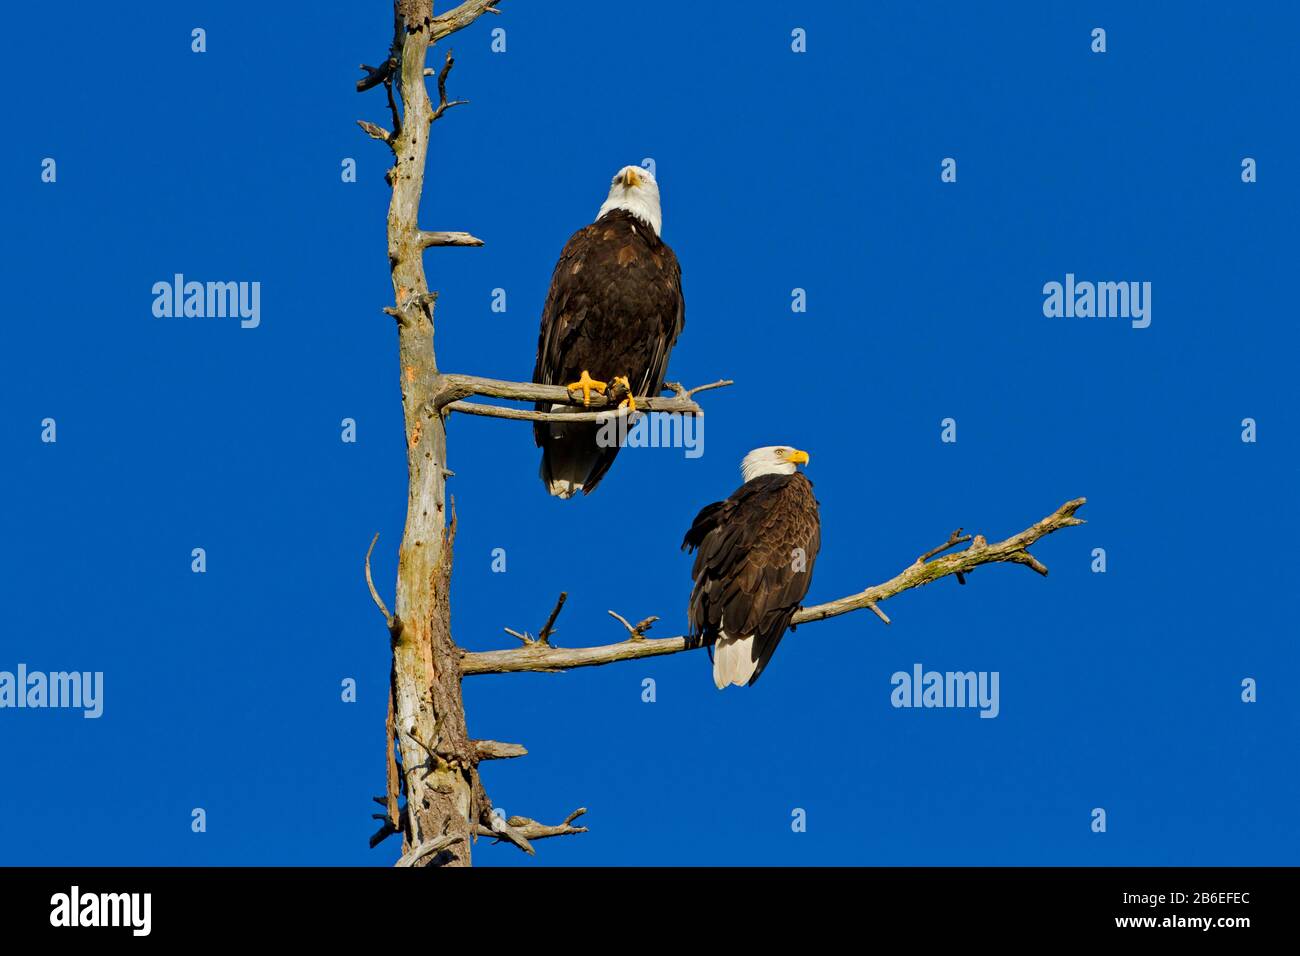 Two Bald Eagles (Haliaeetus leucocephalus) perched on dead branches of a douglas fir tree along the coast at Nanaimo, Vancouver Island, BC, Canada Stock Photo